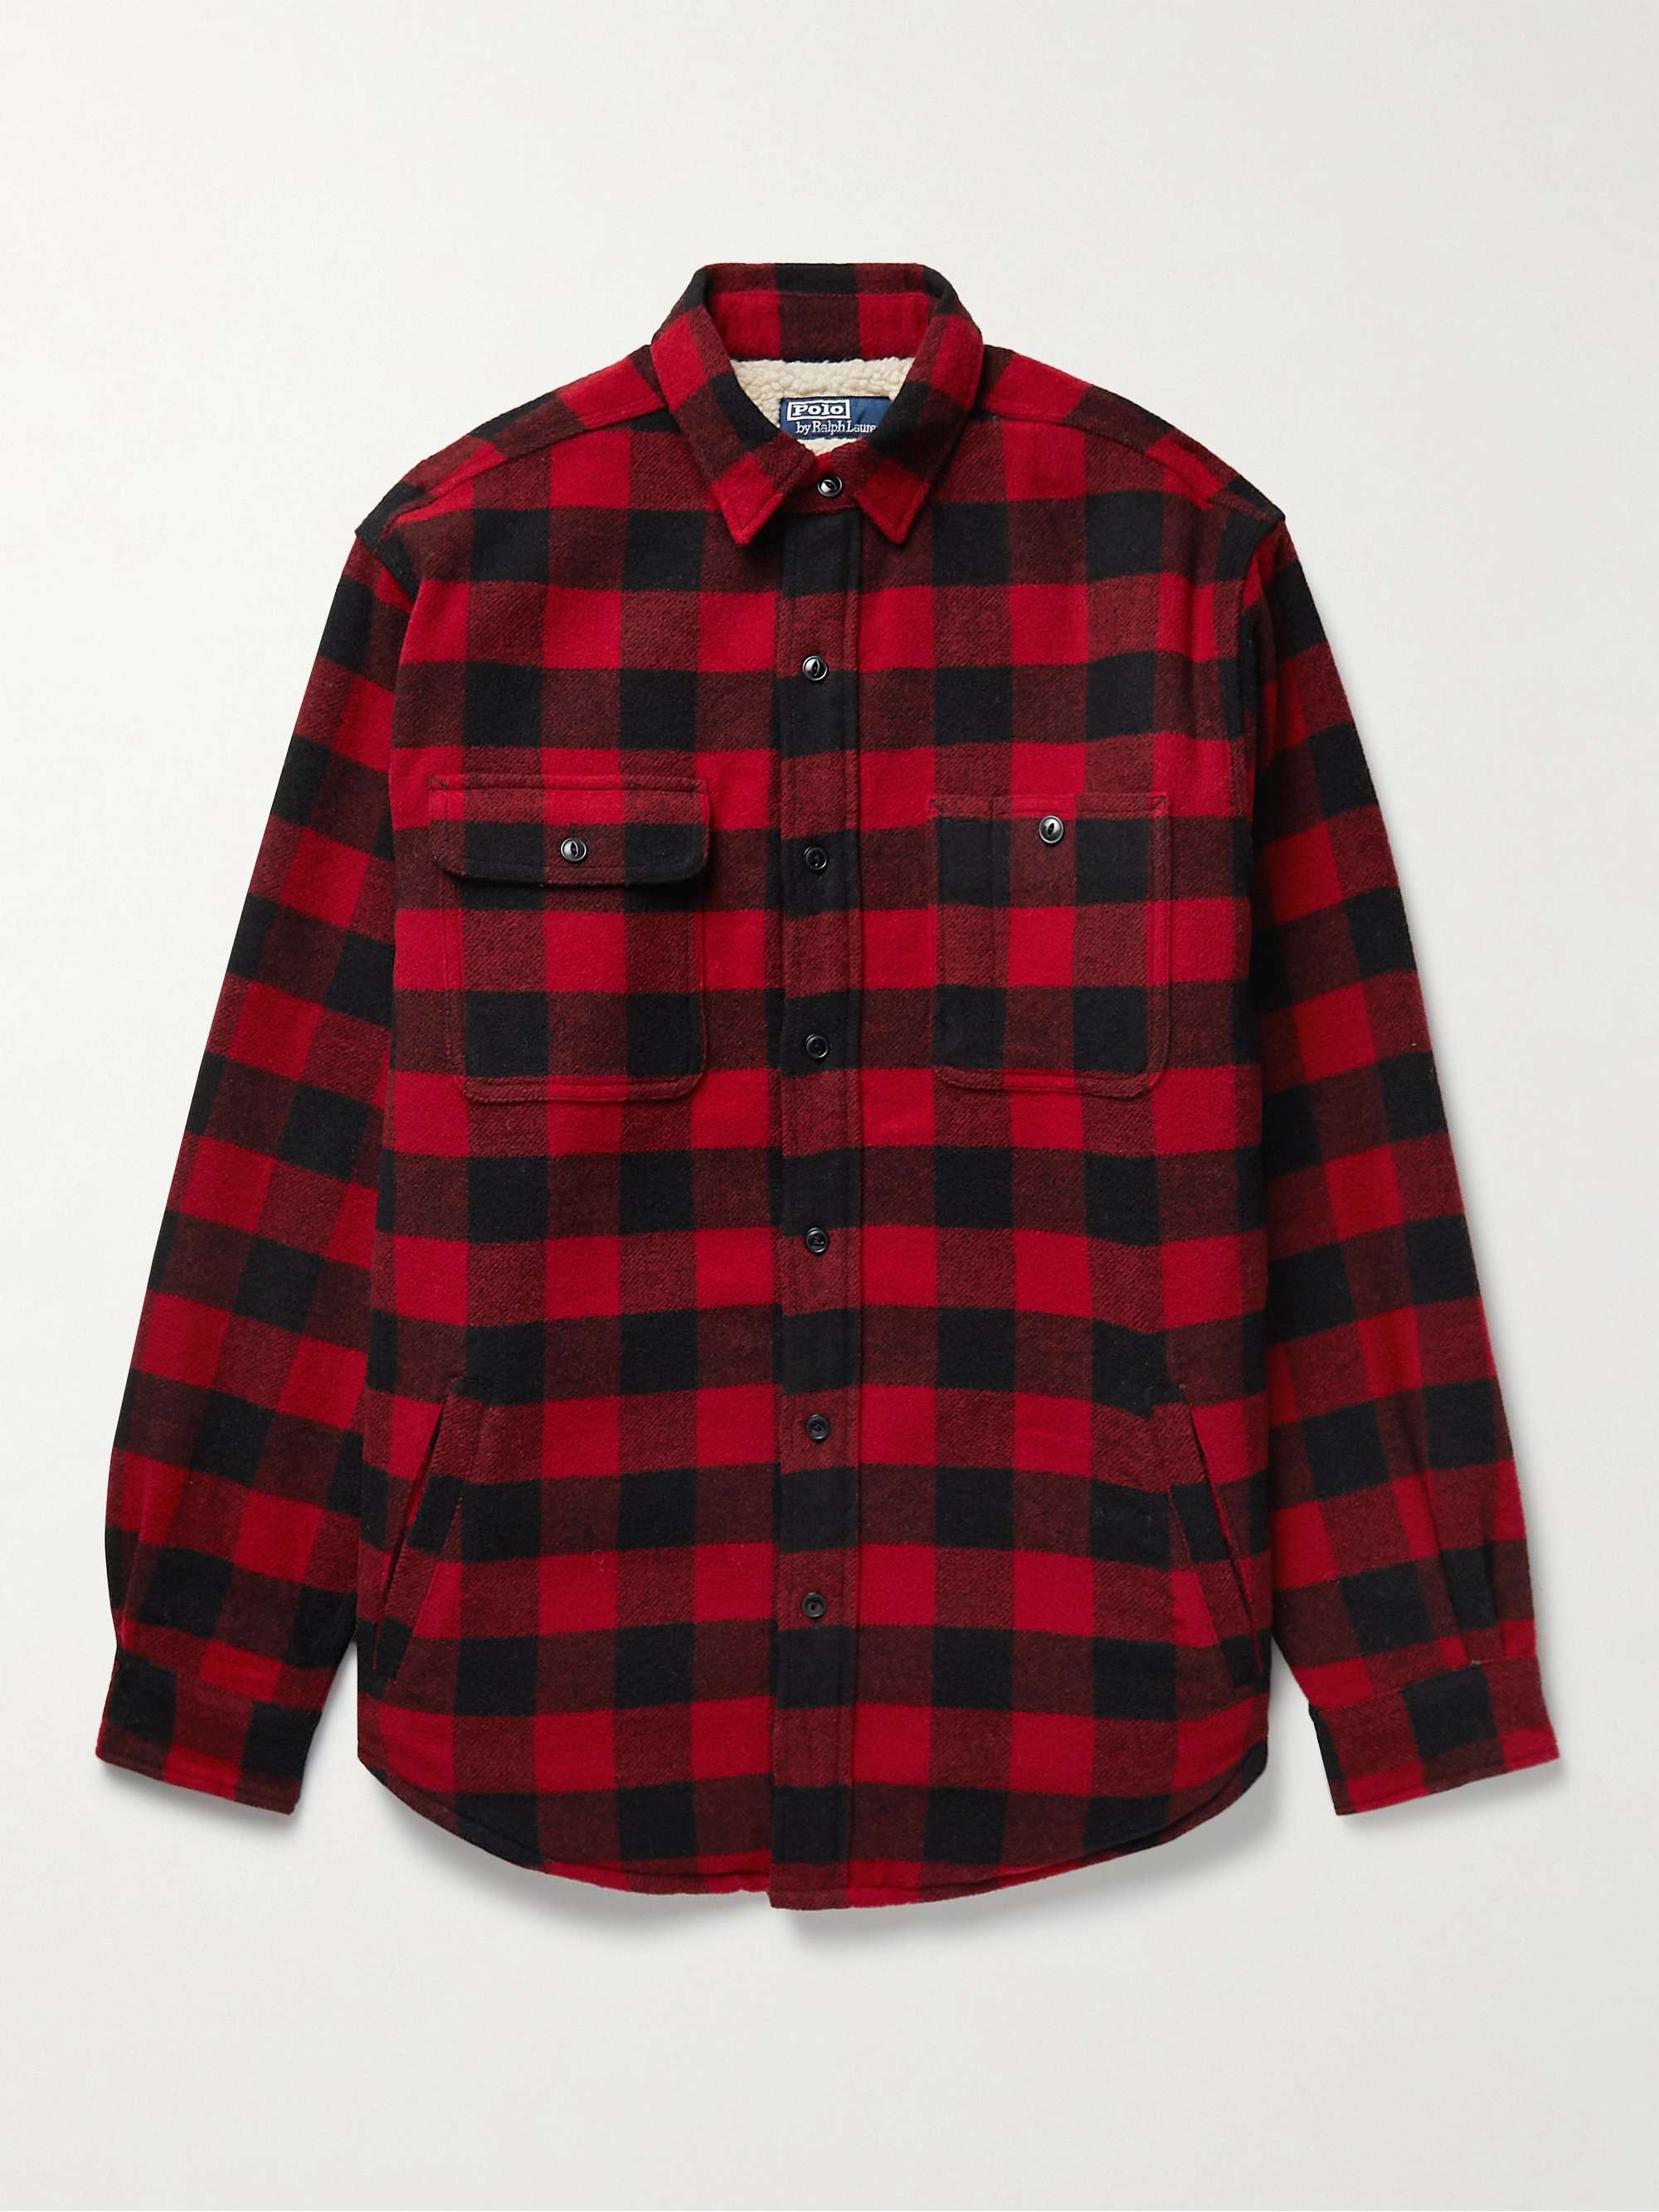 Red Checked Wool-Blend Flannel Overshirt | POLO RALPH LAUREN | MR PORTER